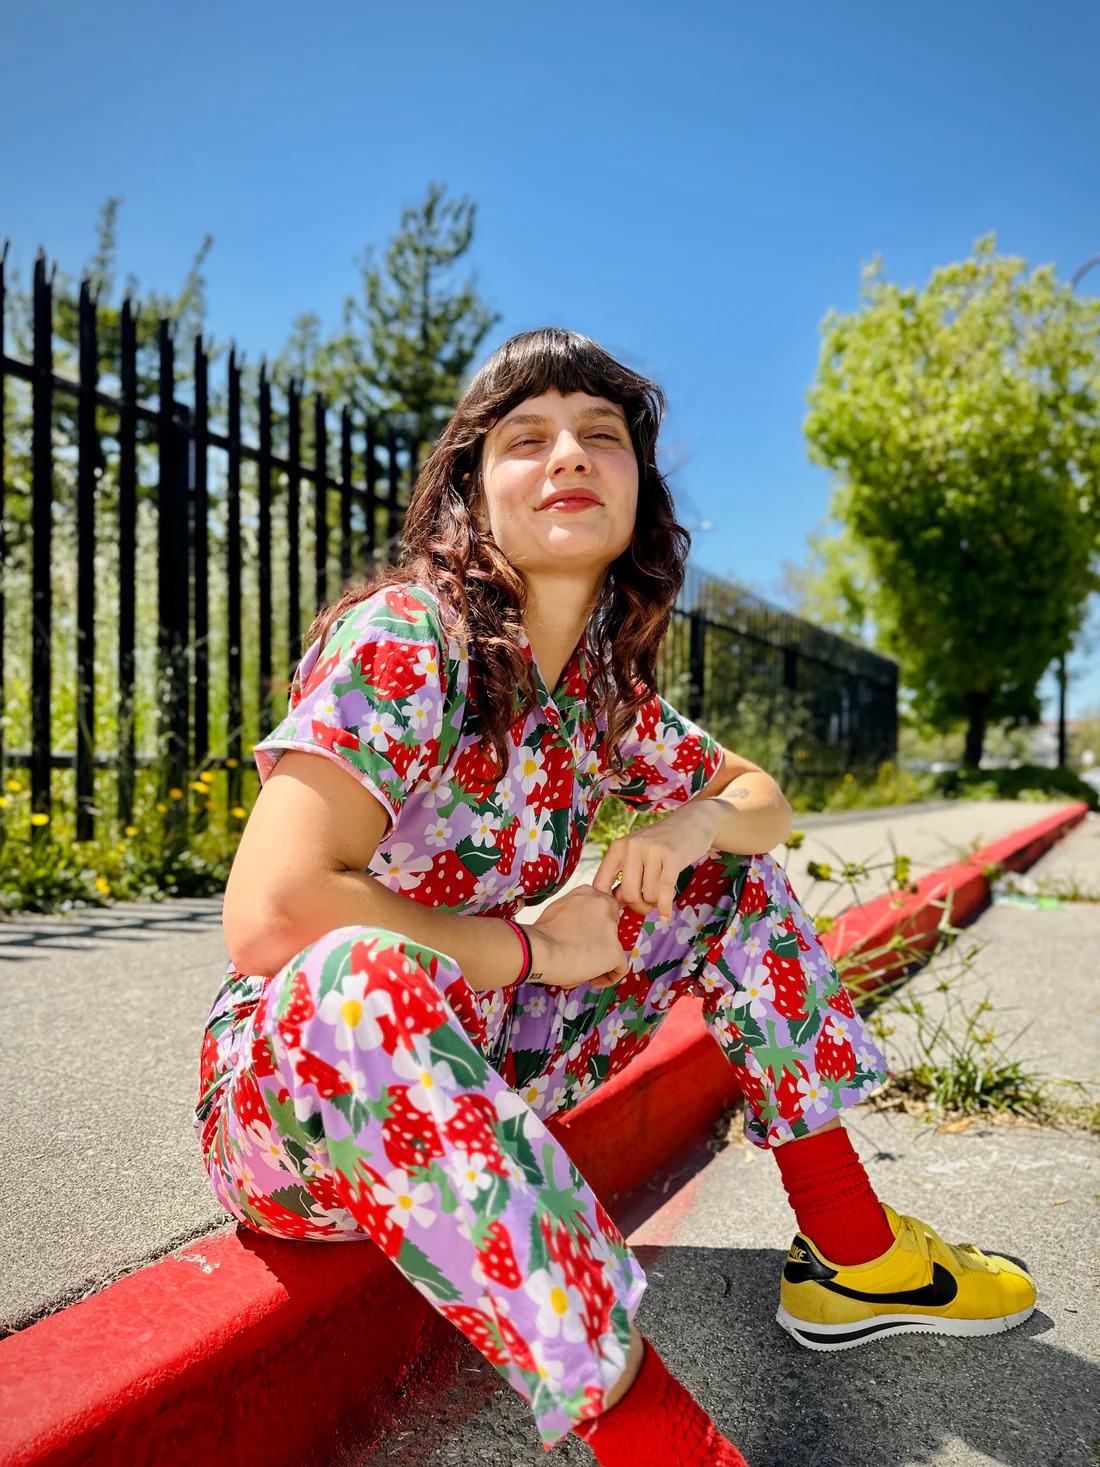 Person sitting on a sidewalk curb wearing a brightly colored floral outfit, red socks, and yellow sneakers. A black metal fence and green trees are visible in the background.